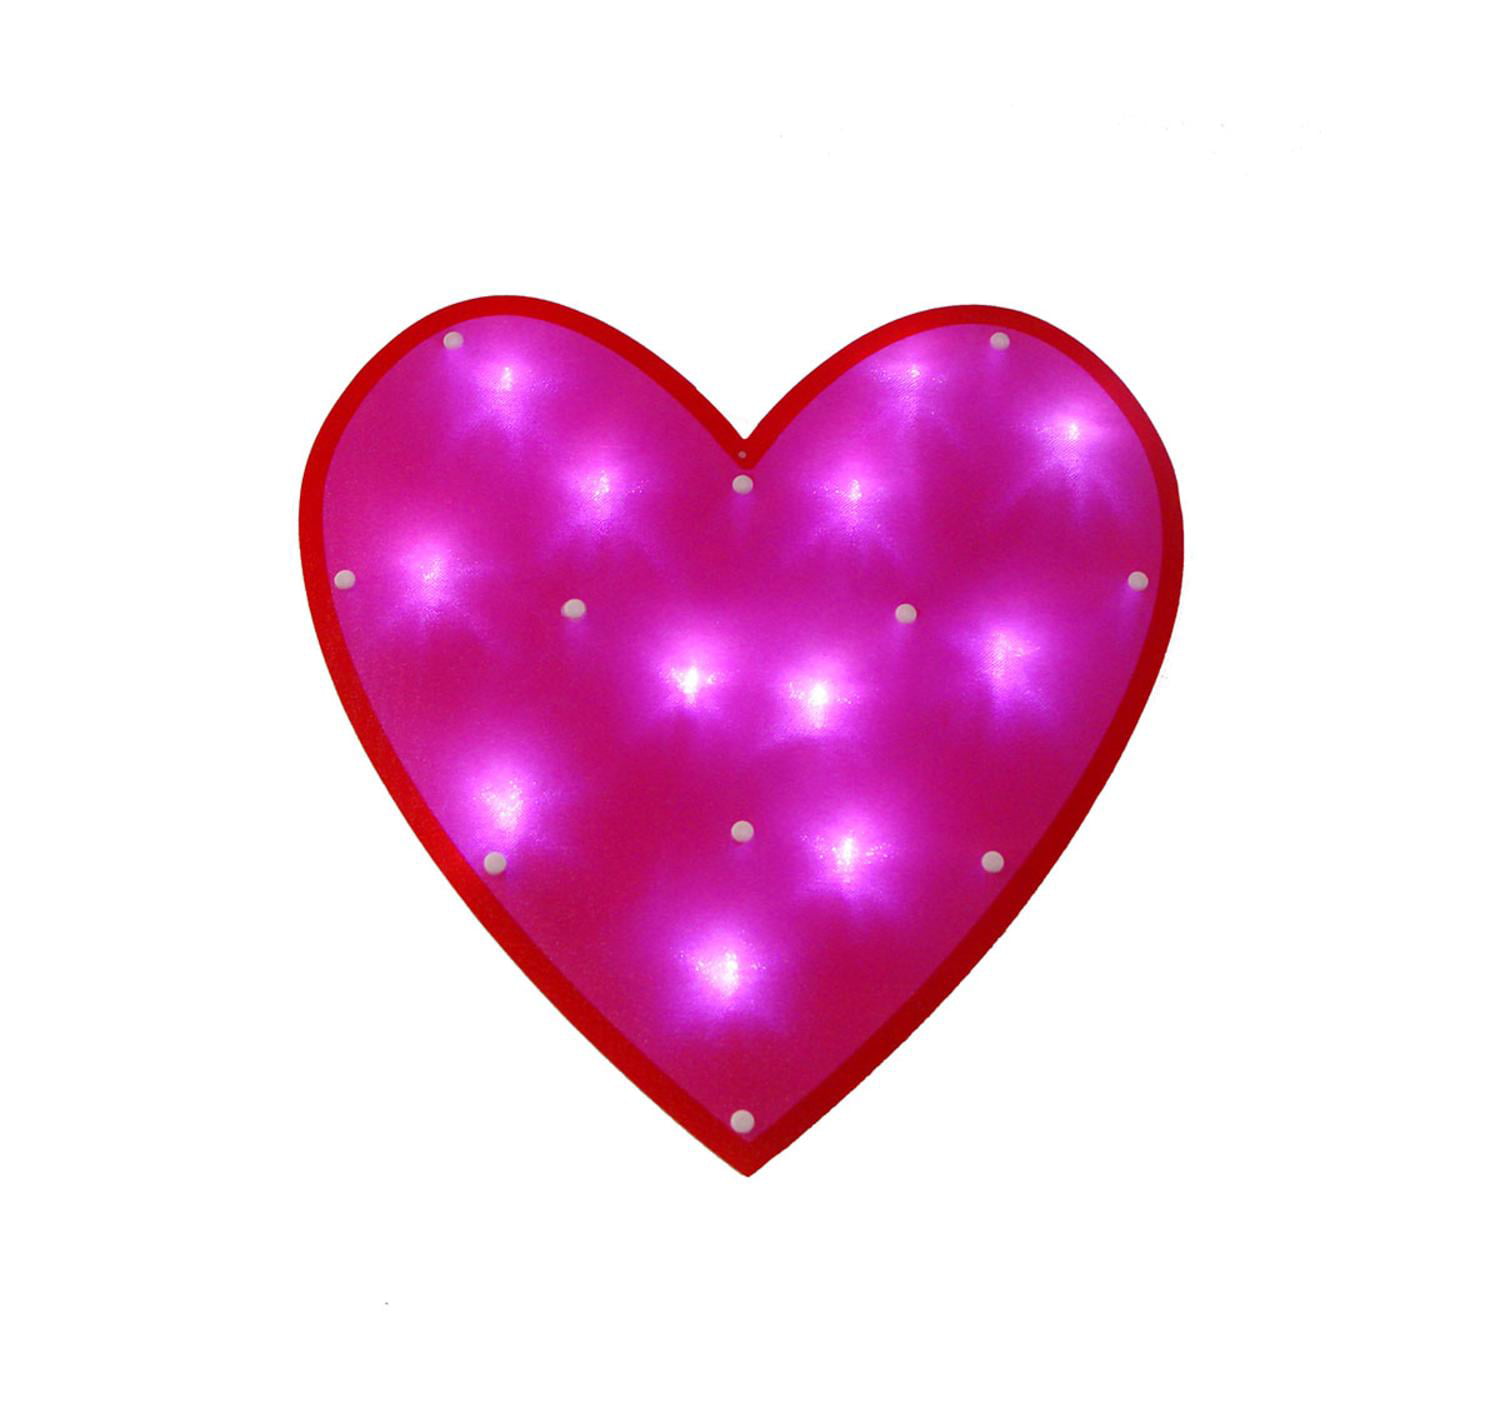 1 Piece Details about   Valentine's Day Lighted Heart Window Decoration 